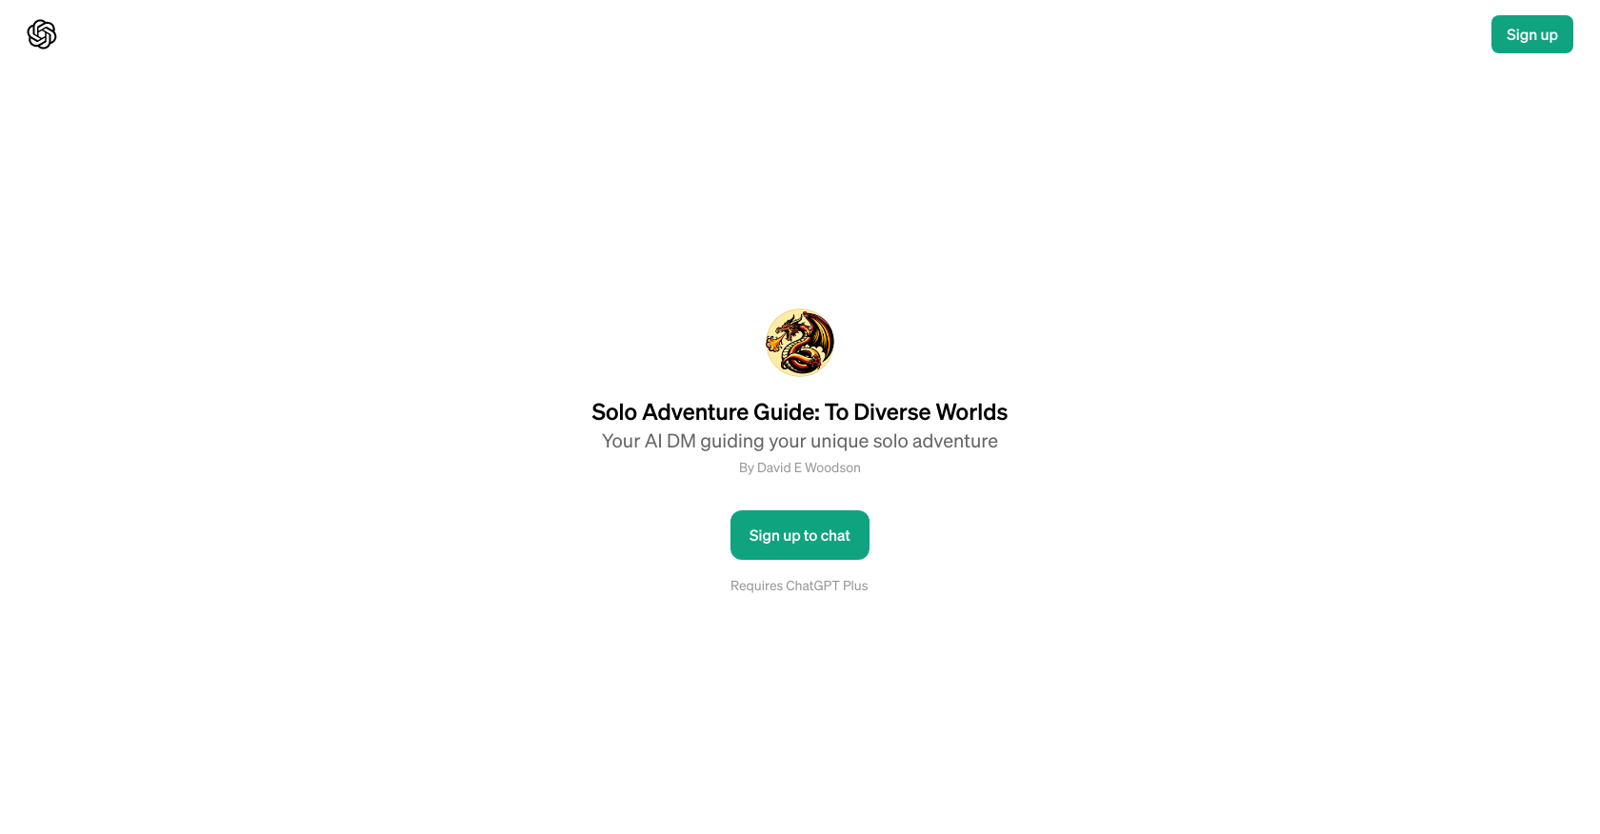 Solo Adventure Guide: To Diverse Worlds website